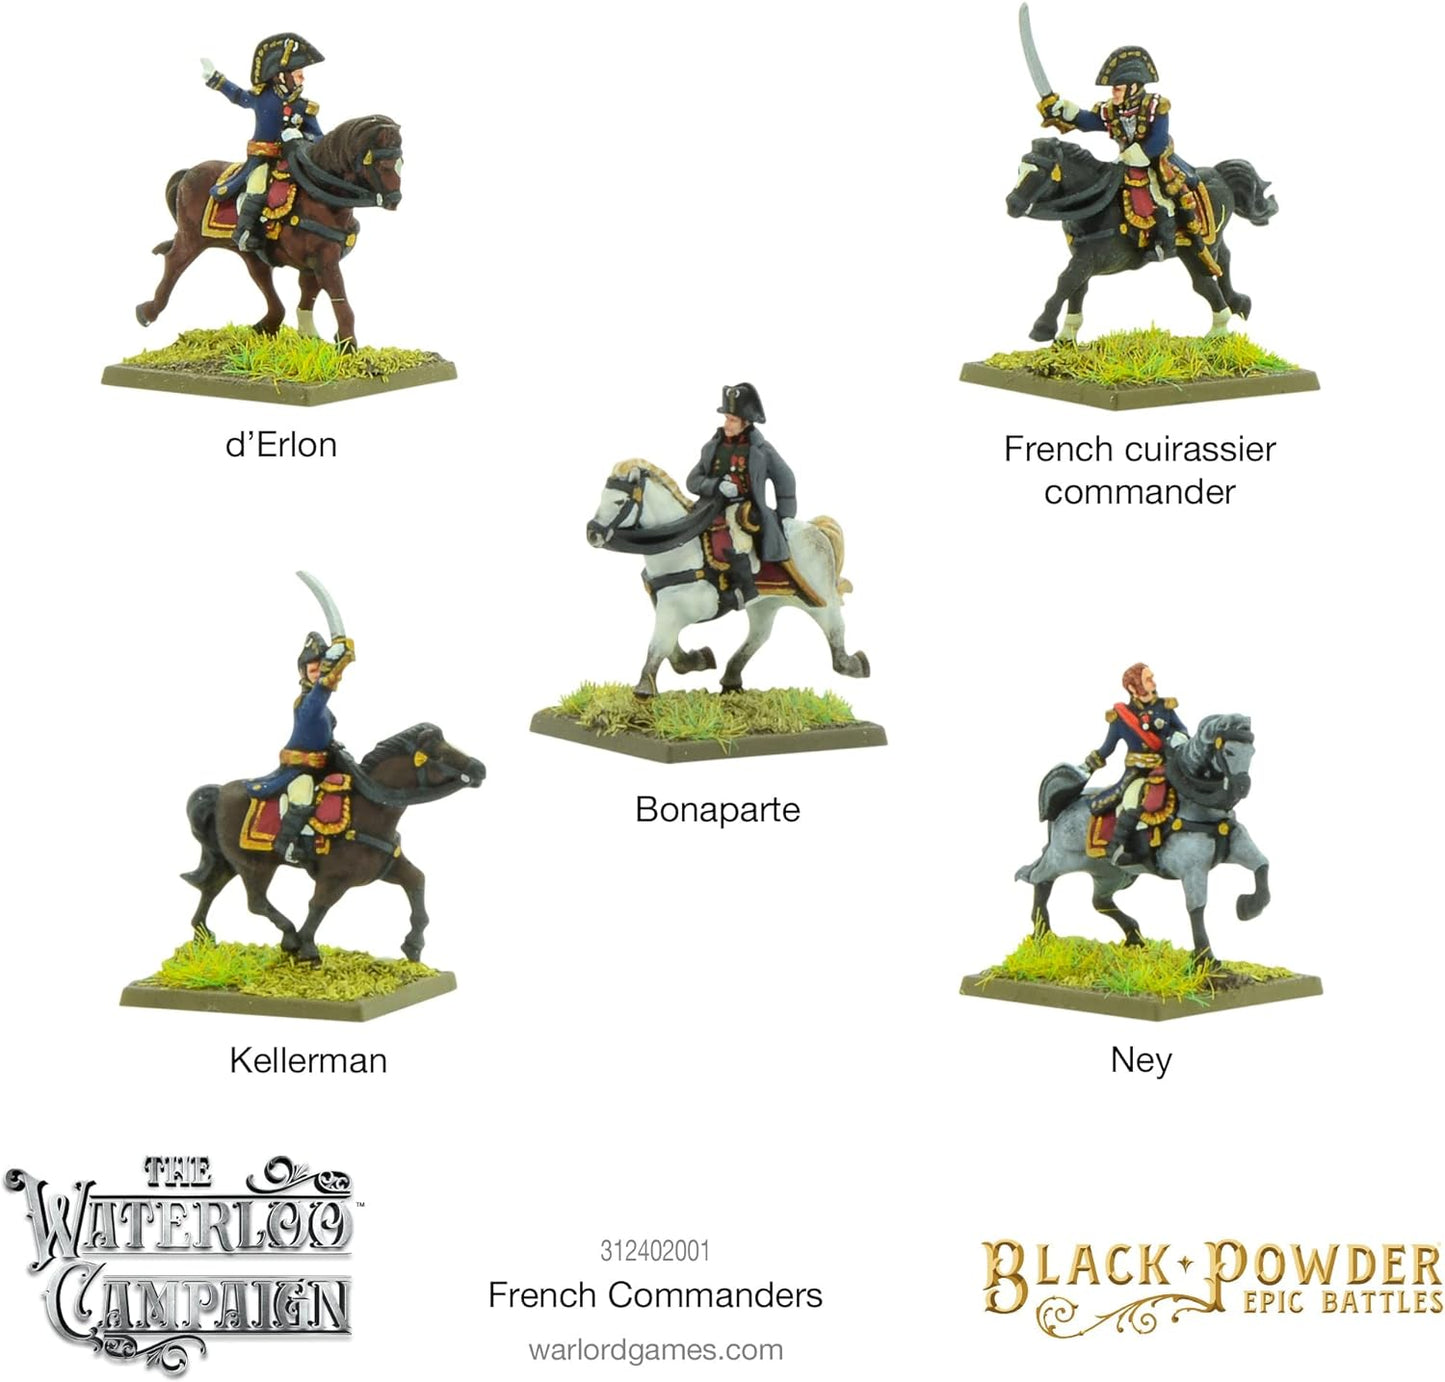 Warlord Games Black Powder Epic Battles: Napoleonic French Commanders #312402001